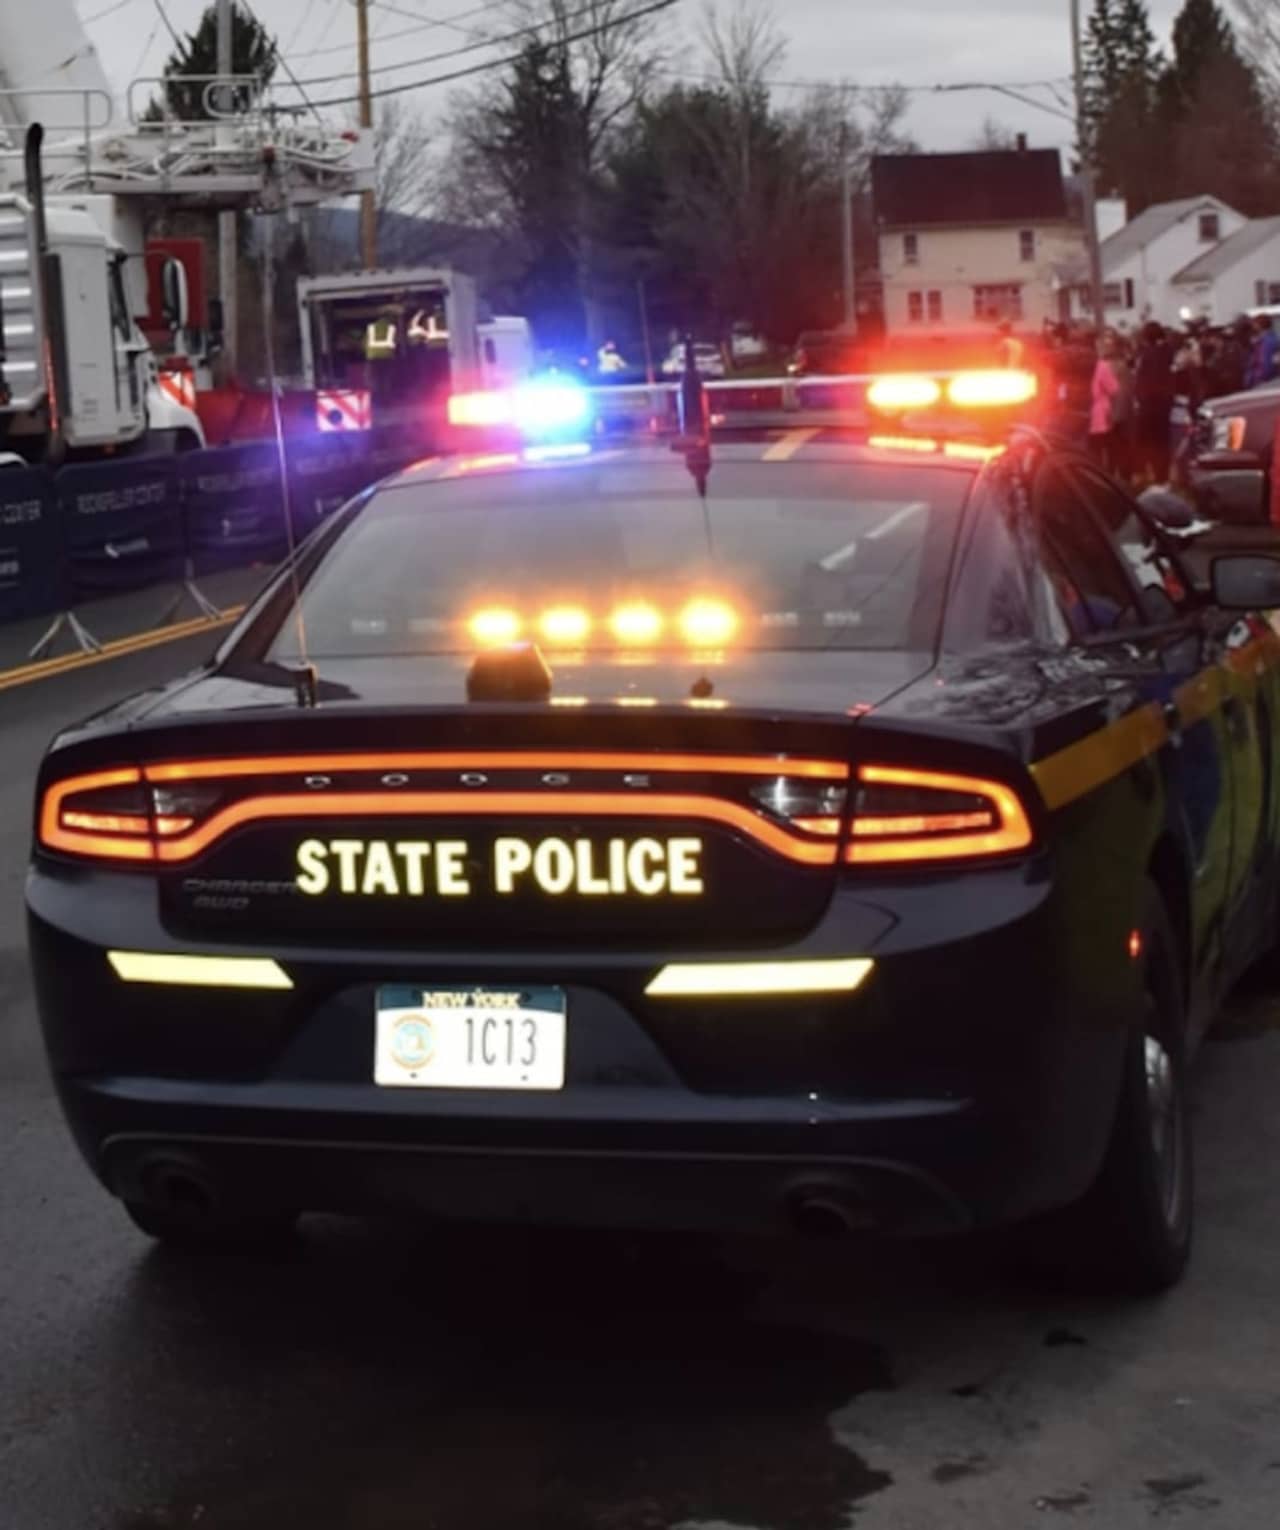 New York State Police arrested three Suffolk County men for allegedly buying alcohol for two children under 17 at an area restaurant.